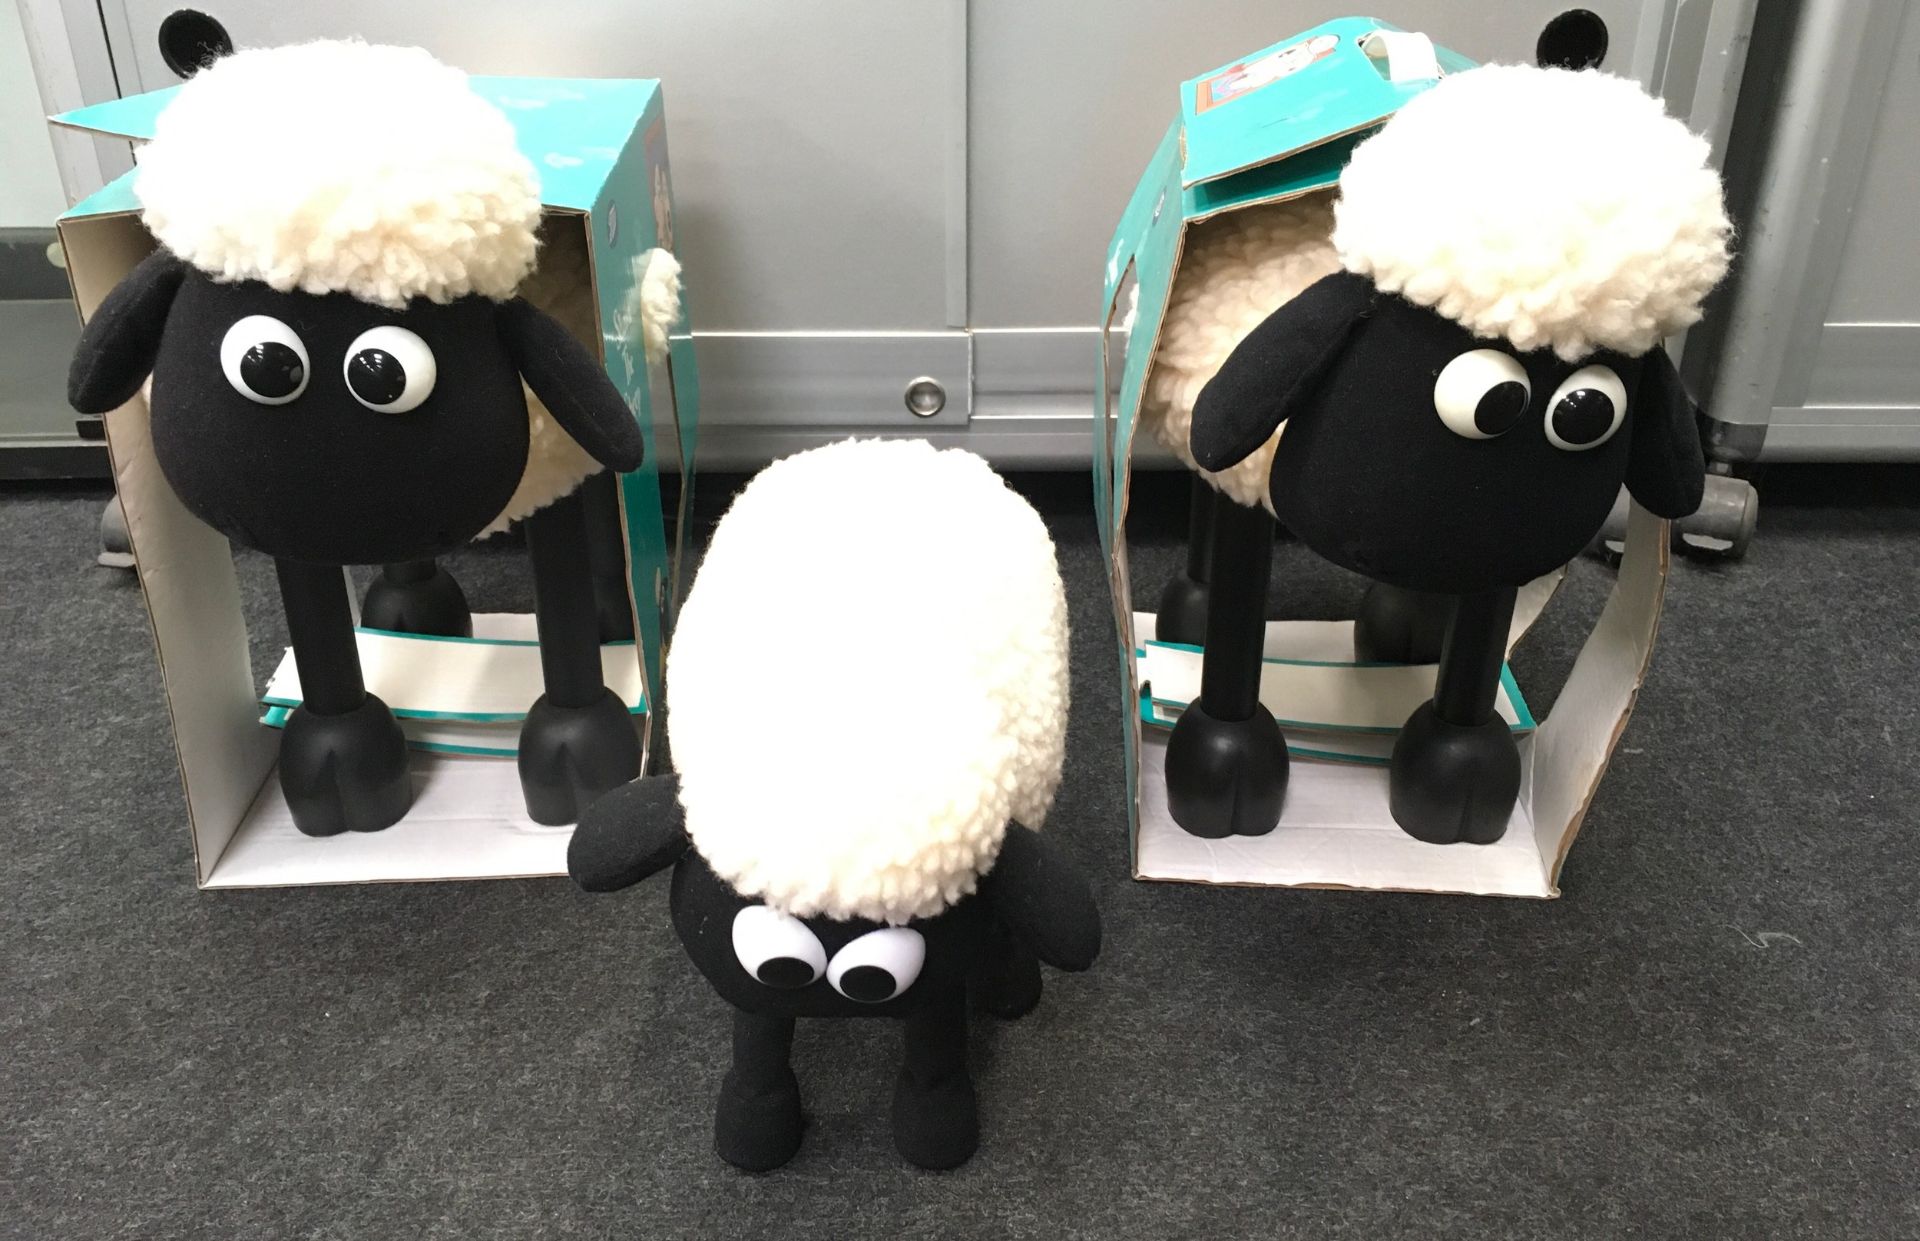 2 Boots Wallace and Gromit Shaun the Sheep footstools, boxed together with another Boots Shaun the - Image 2 of 2